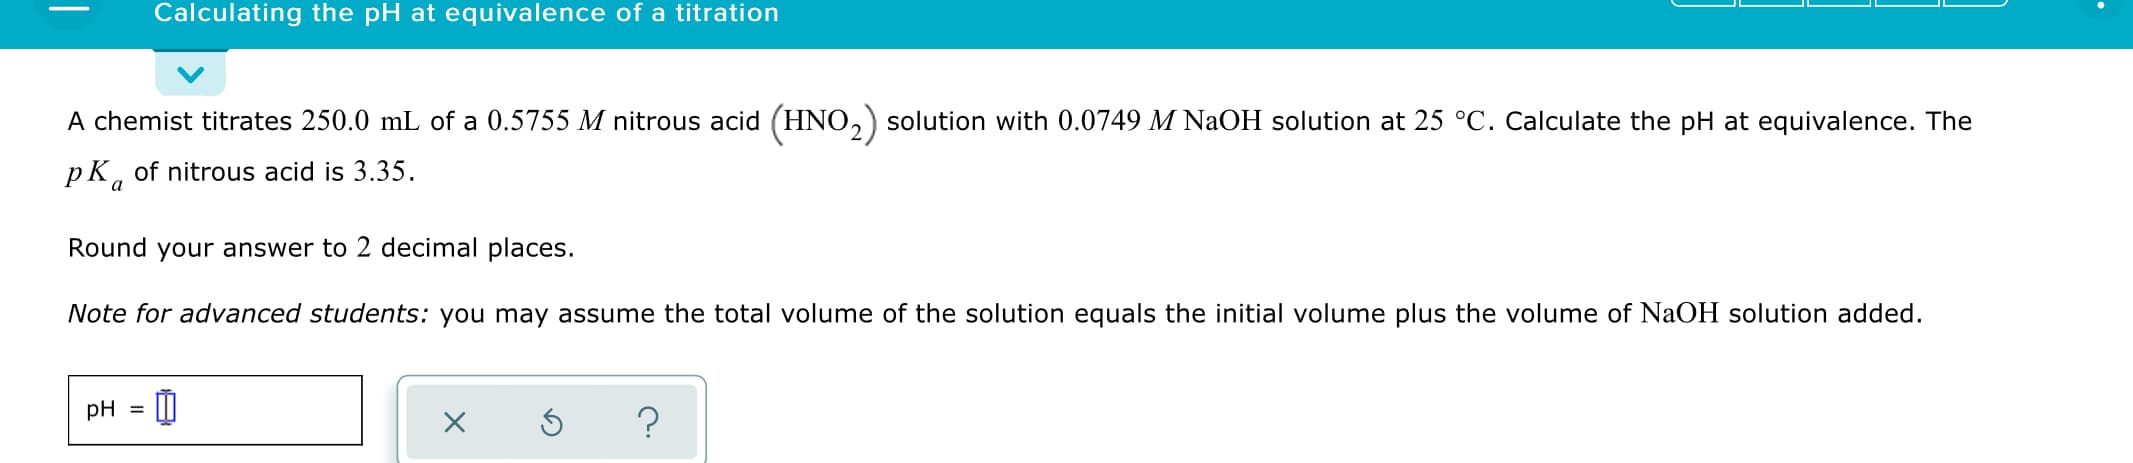 Calculating the pH at equivalence of a titration
A chemist titrates 250.0 mL of a 0.5755 M nitrous acid (HNO,) solution with 0.0749 M NaOH solution at 25 °C. Calculate the pH at equivalence. The
pK, of nitrous acid is 3.35.
Round your answer to 2 decimal places.
Note for advanced students: you may assume the total volume of the solution equals the initial volume plus the volume of NaOH solution added.
pH = ||
